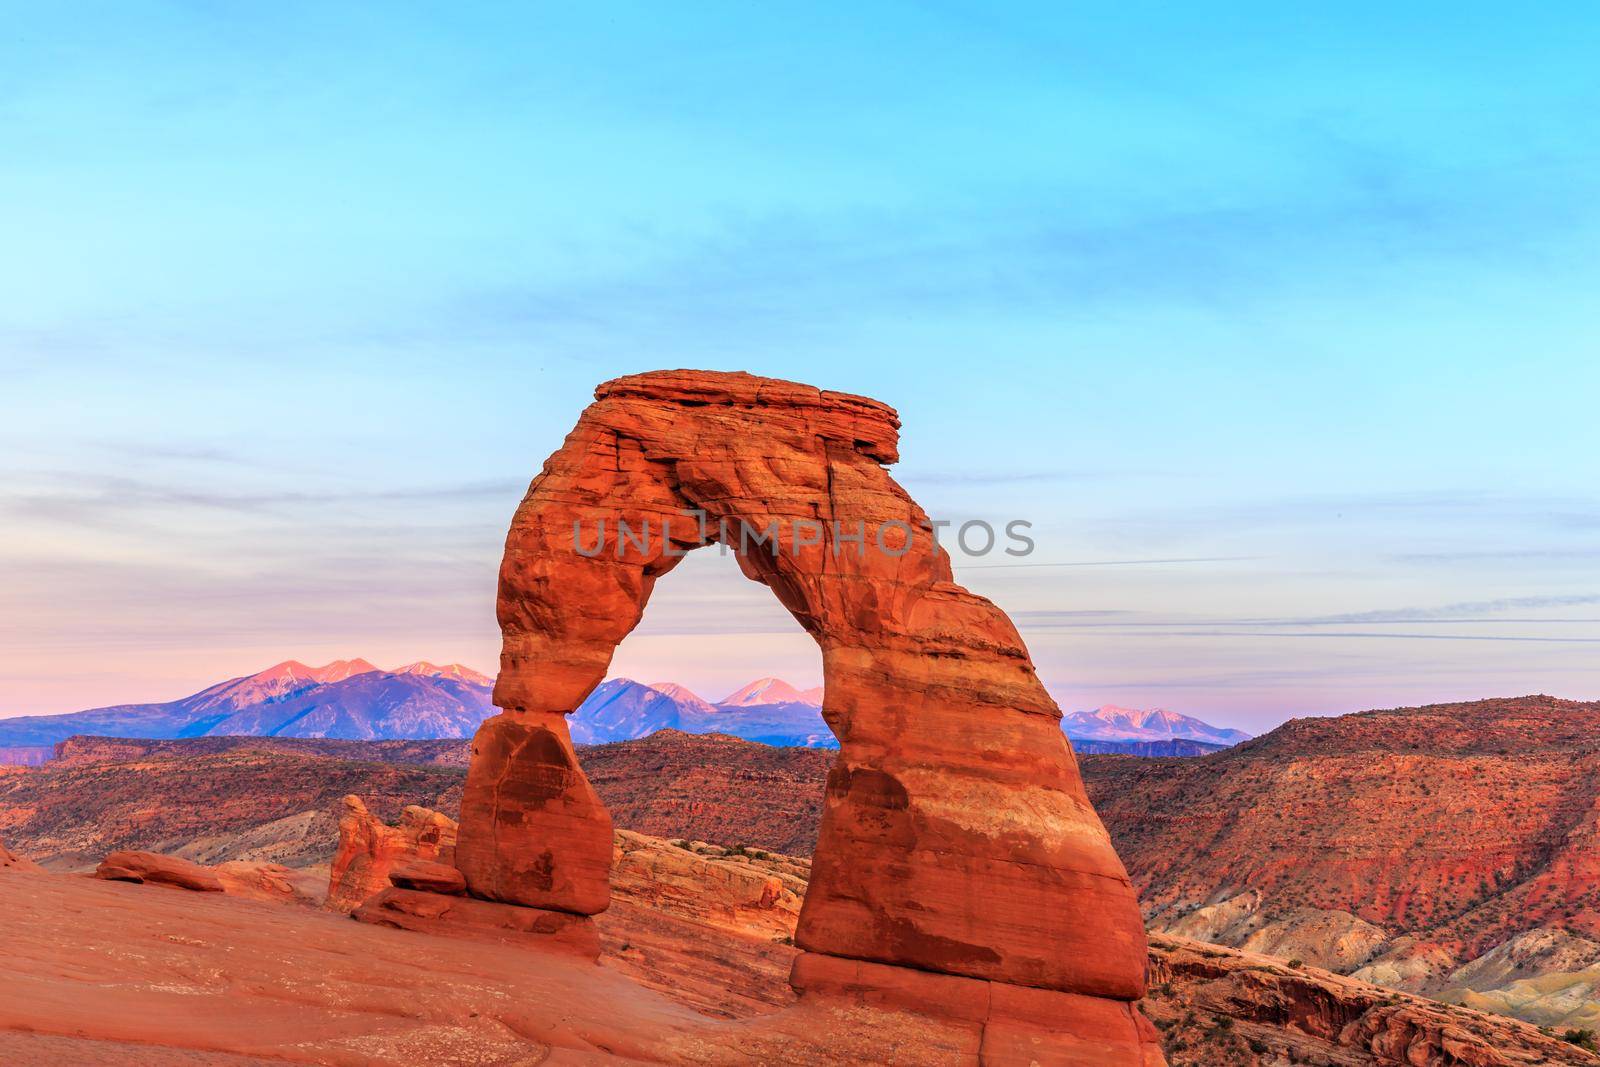 Sunset at delicate arch in Arches National Park, Utah.